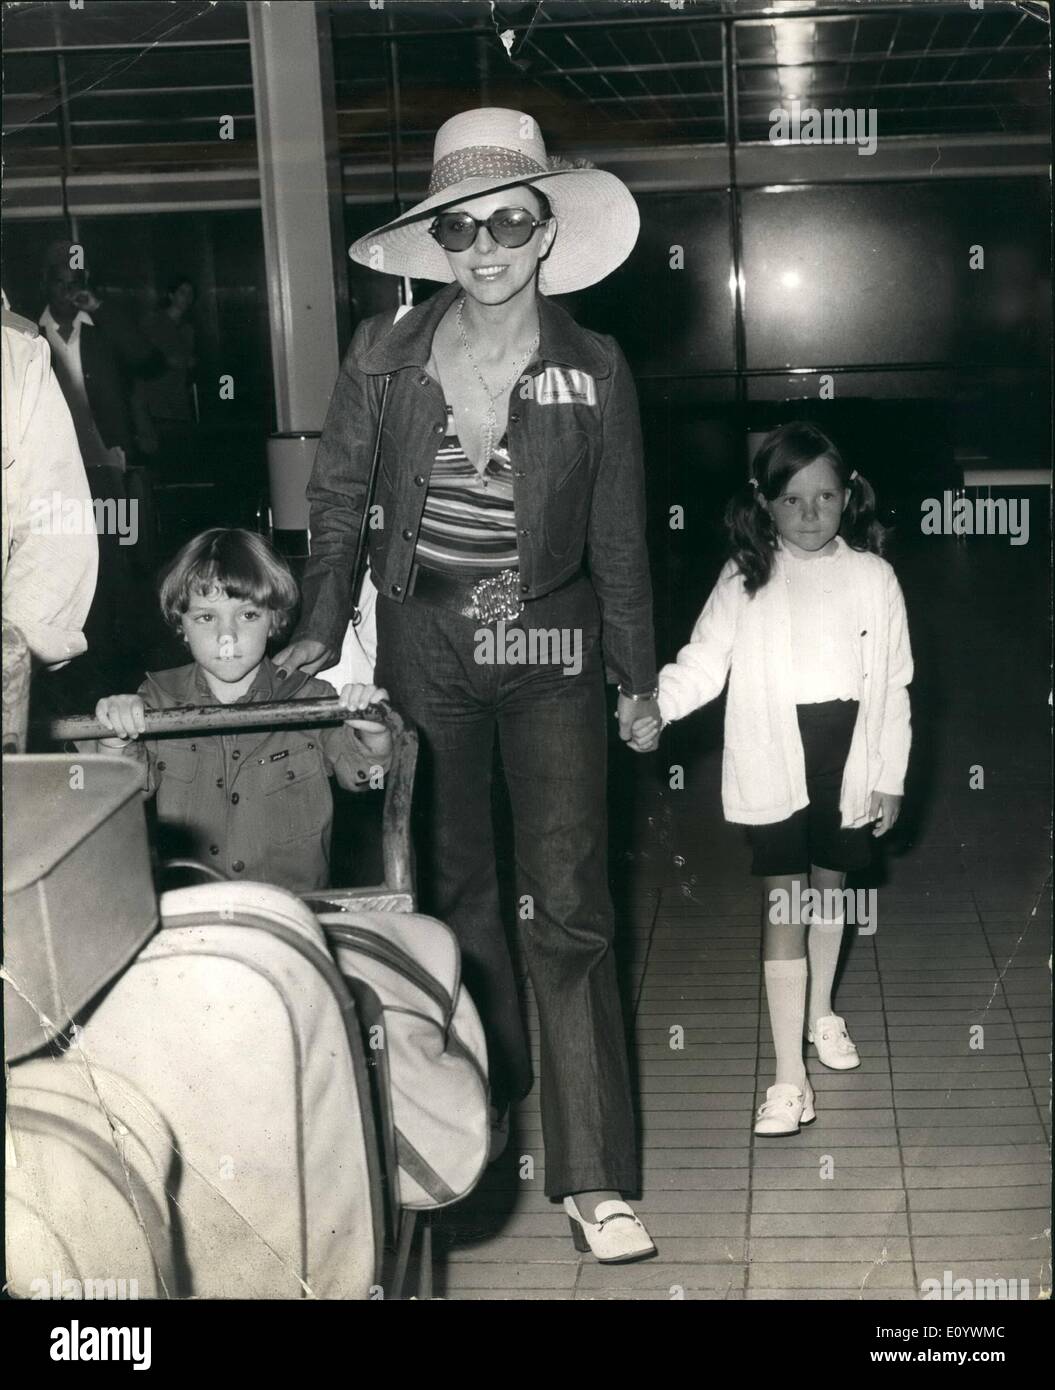 Aug. 08, 1971 - Joan To Live In Spain: Actress Joan Collins, who won a divorce from actor-director Anthony Newley in Los Angeles last week, photographed yesterday after flying back to London with their children, Sacha, 5, and Tara, 7. Today they're off to live in Spain. Stock Photo